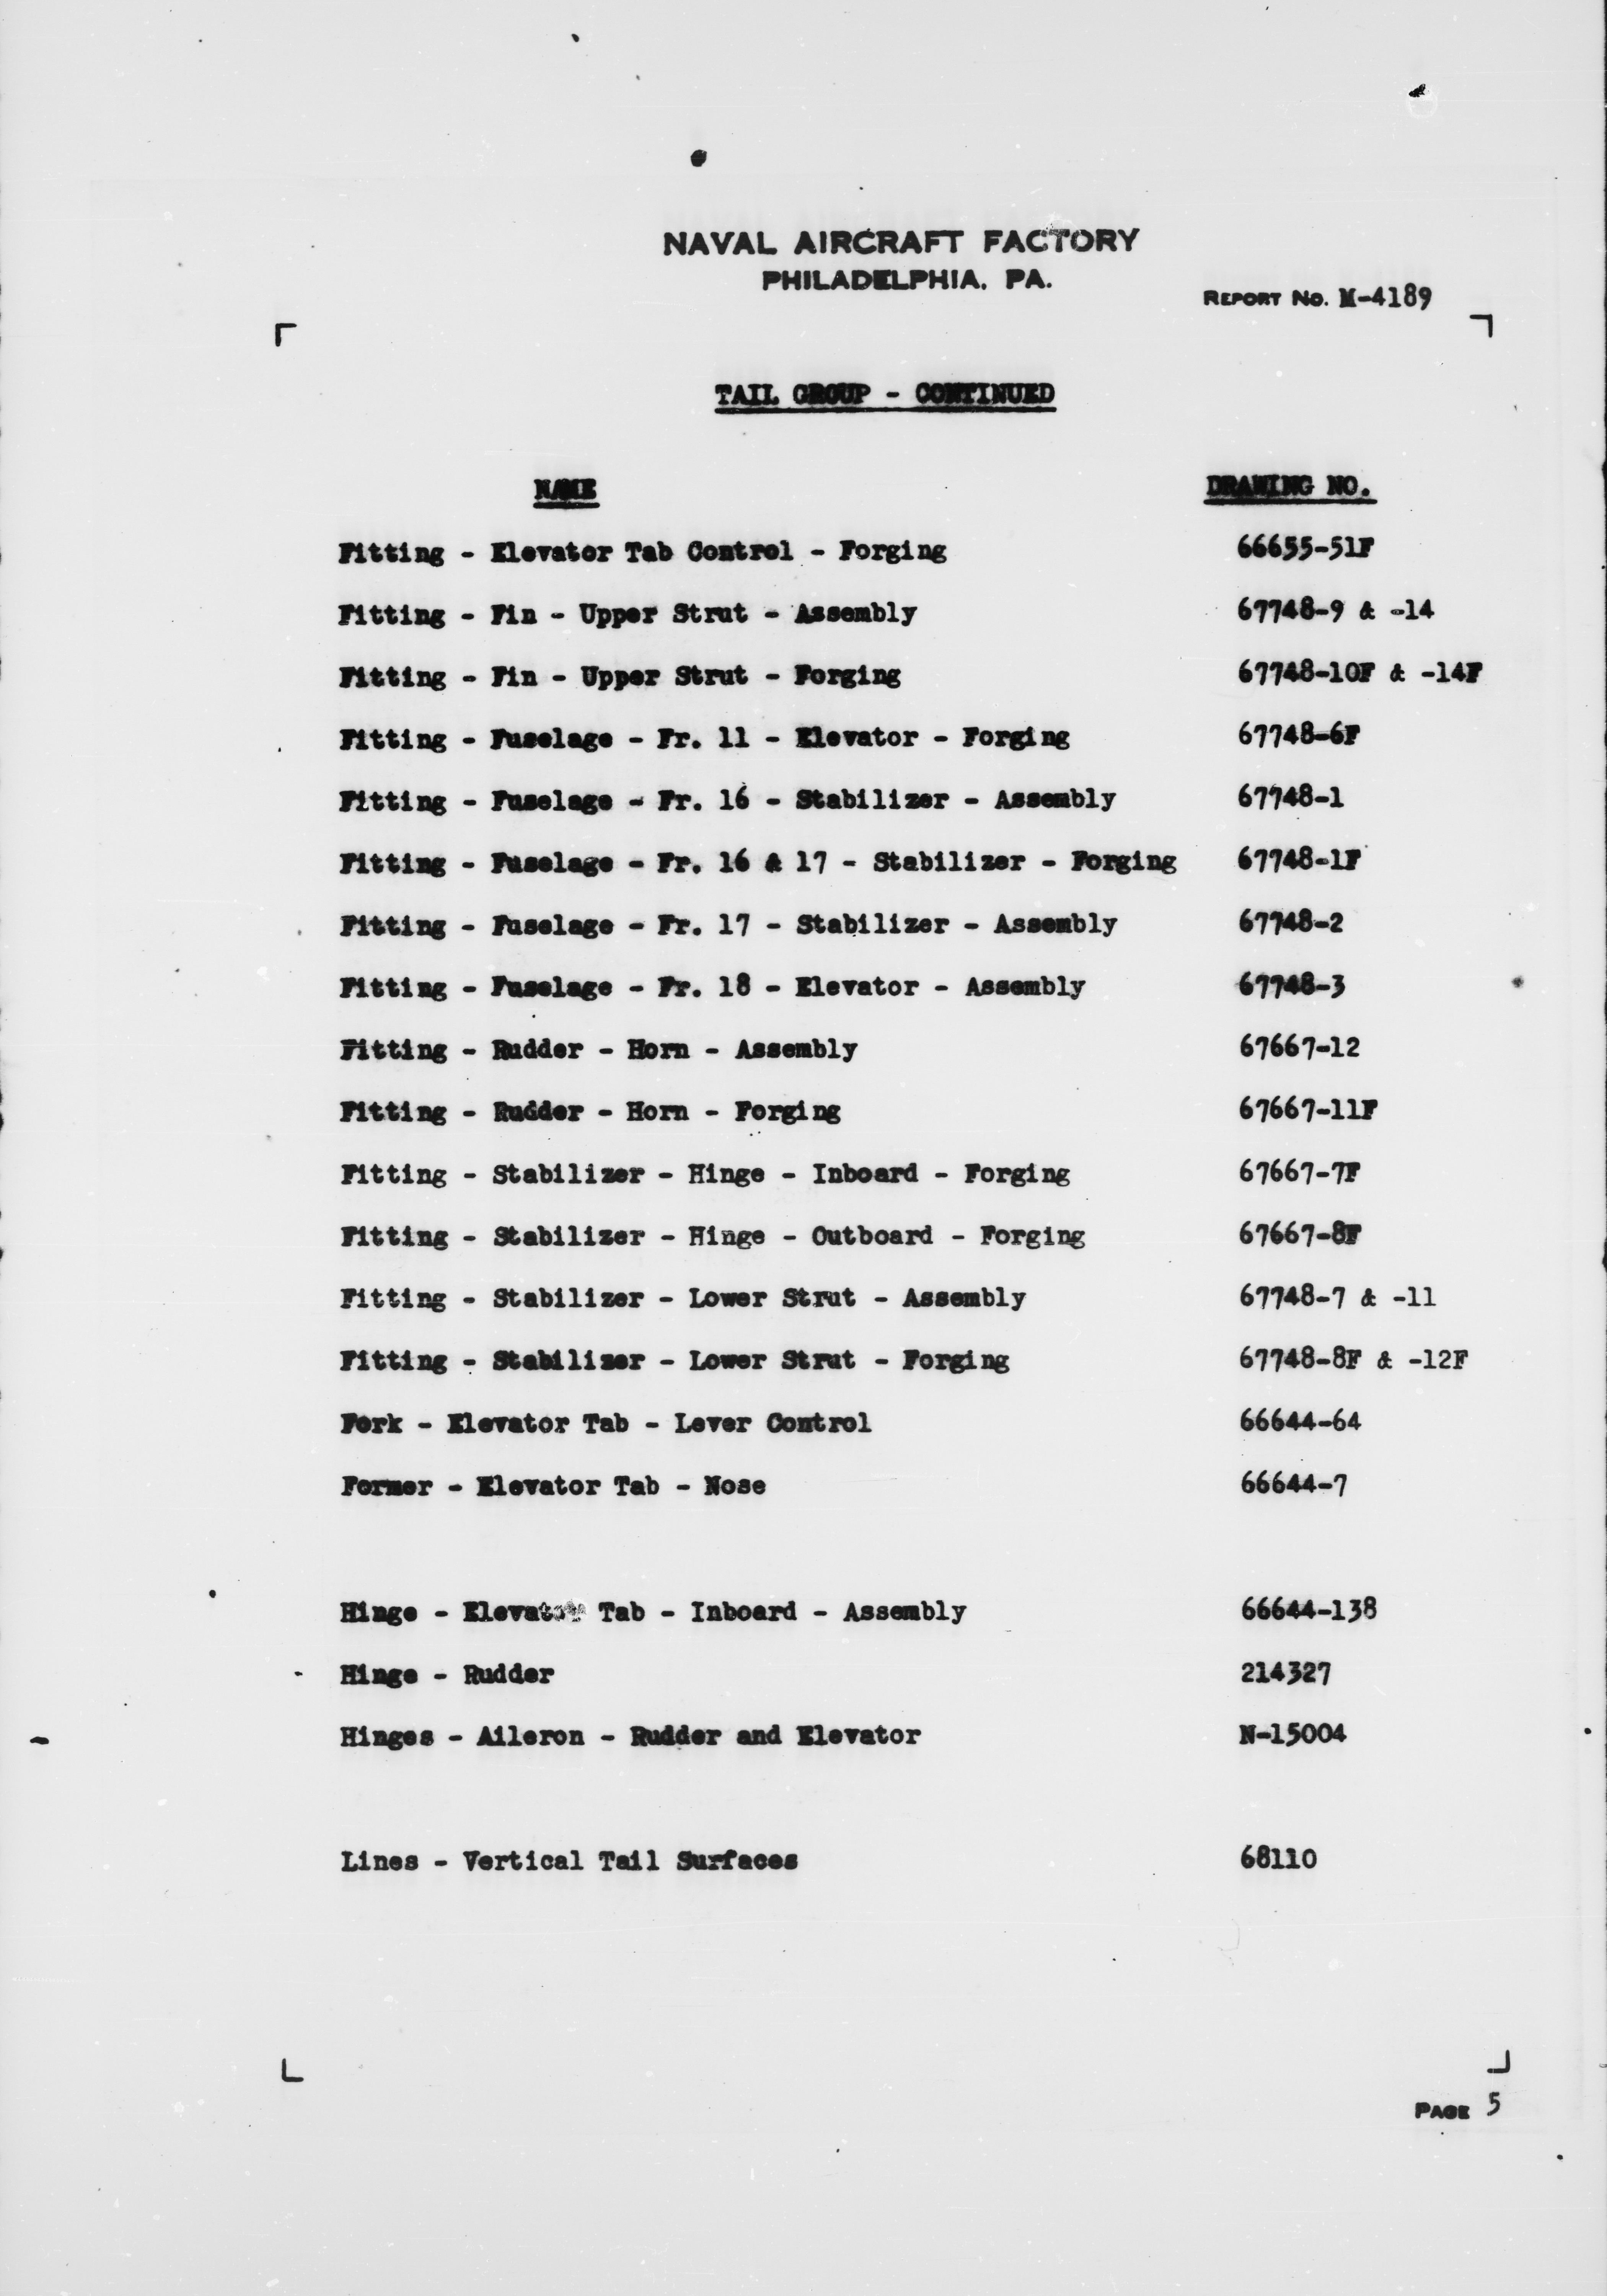 Sample page 6 from AirCorps Library document: Alphabetical Index of Drawings for Model N3N-3 Airplane